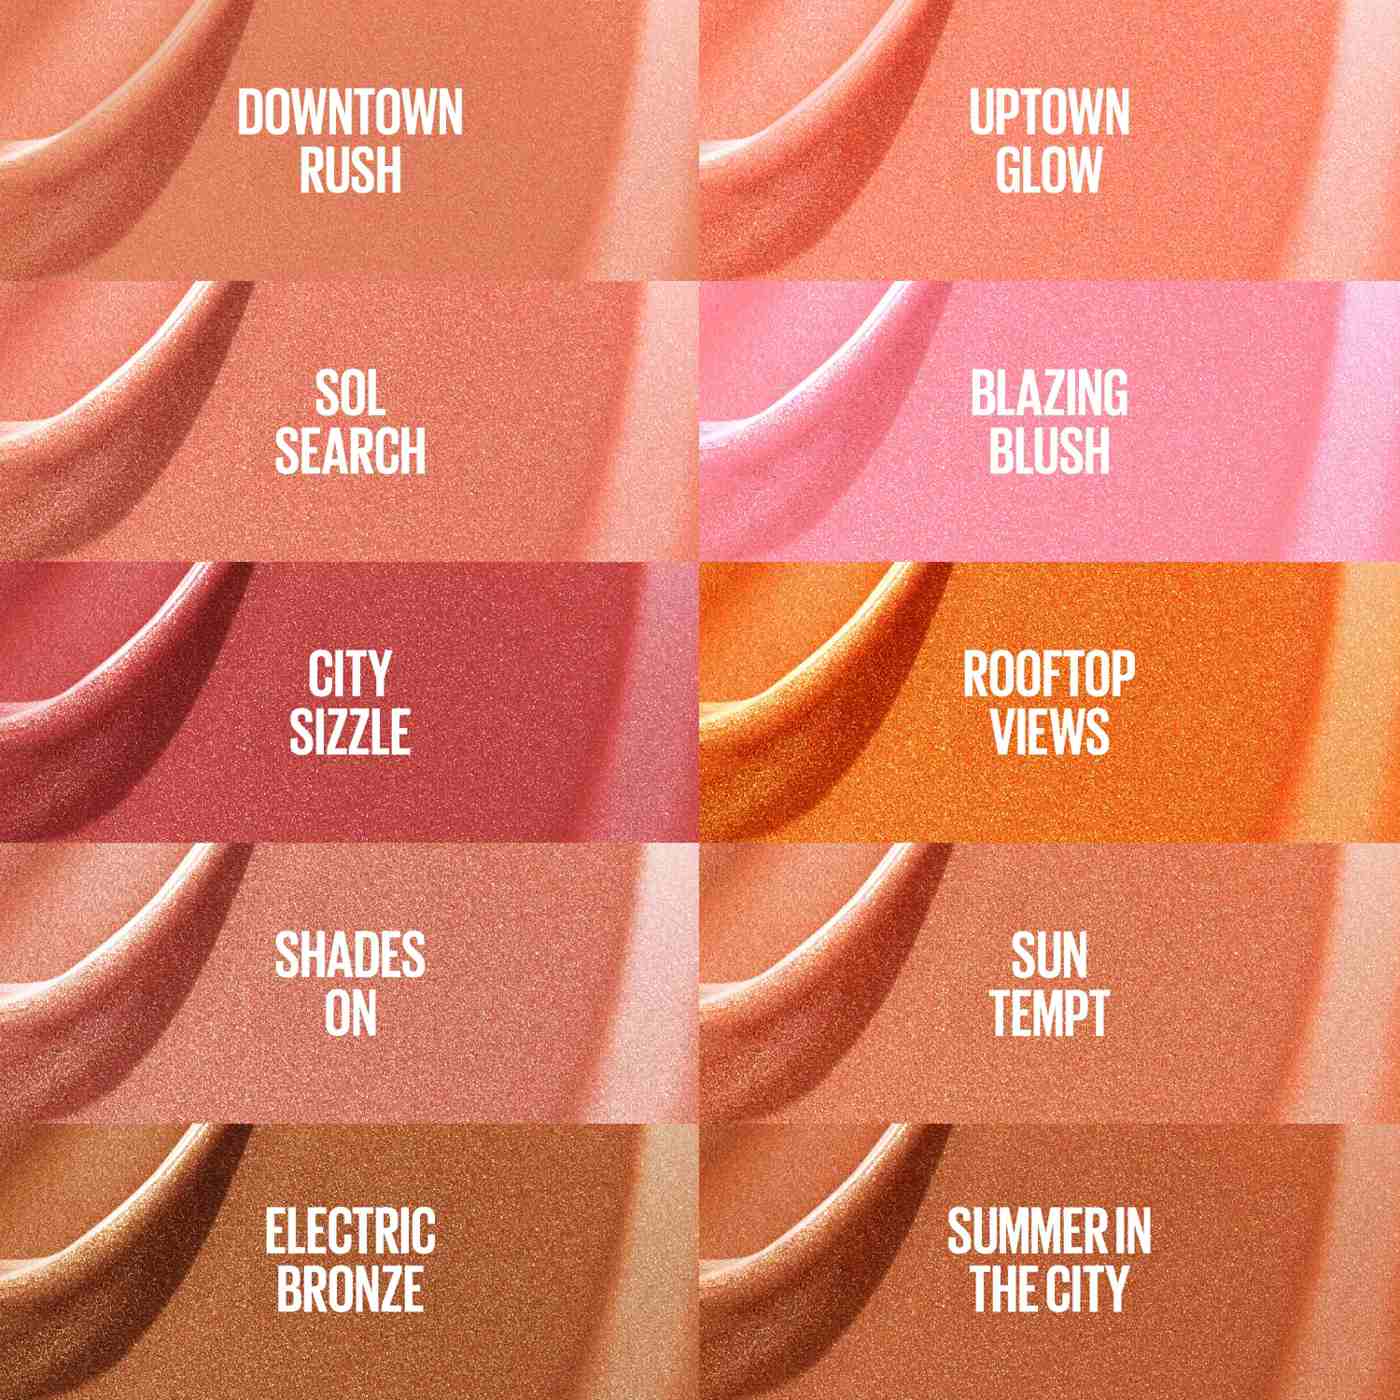 Maybelline Sunkisser Multi-Use Liquid Blush And Bronzer - City Sizzle; image 3 of 6